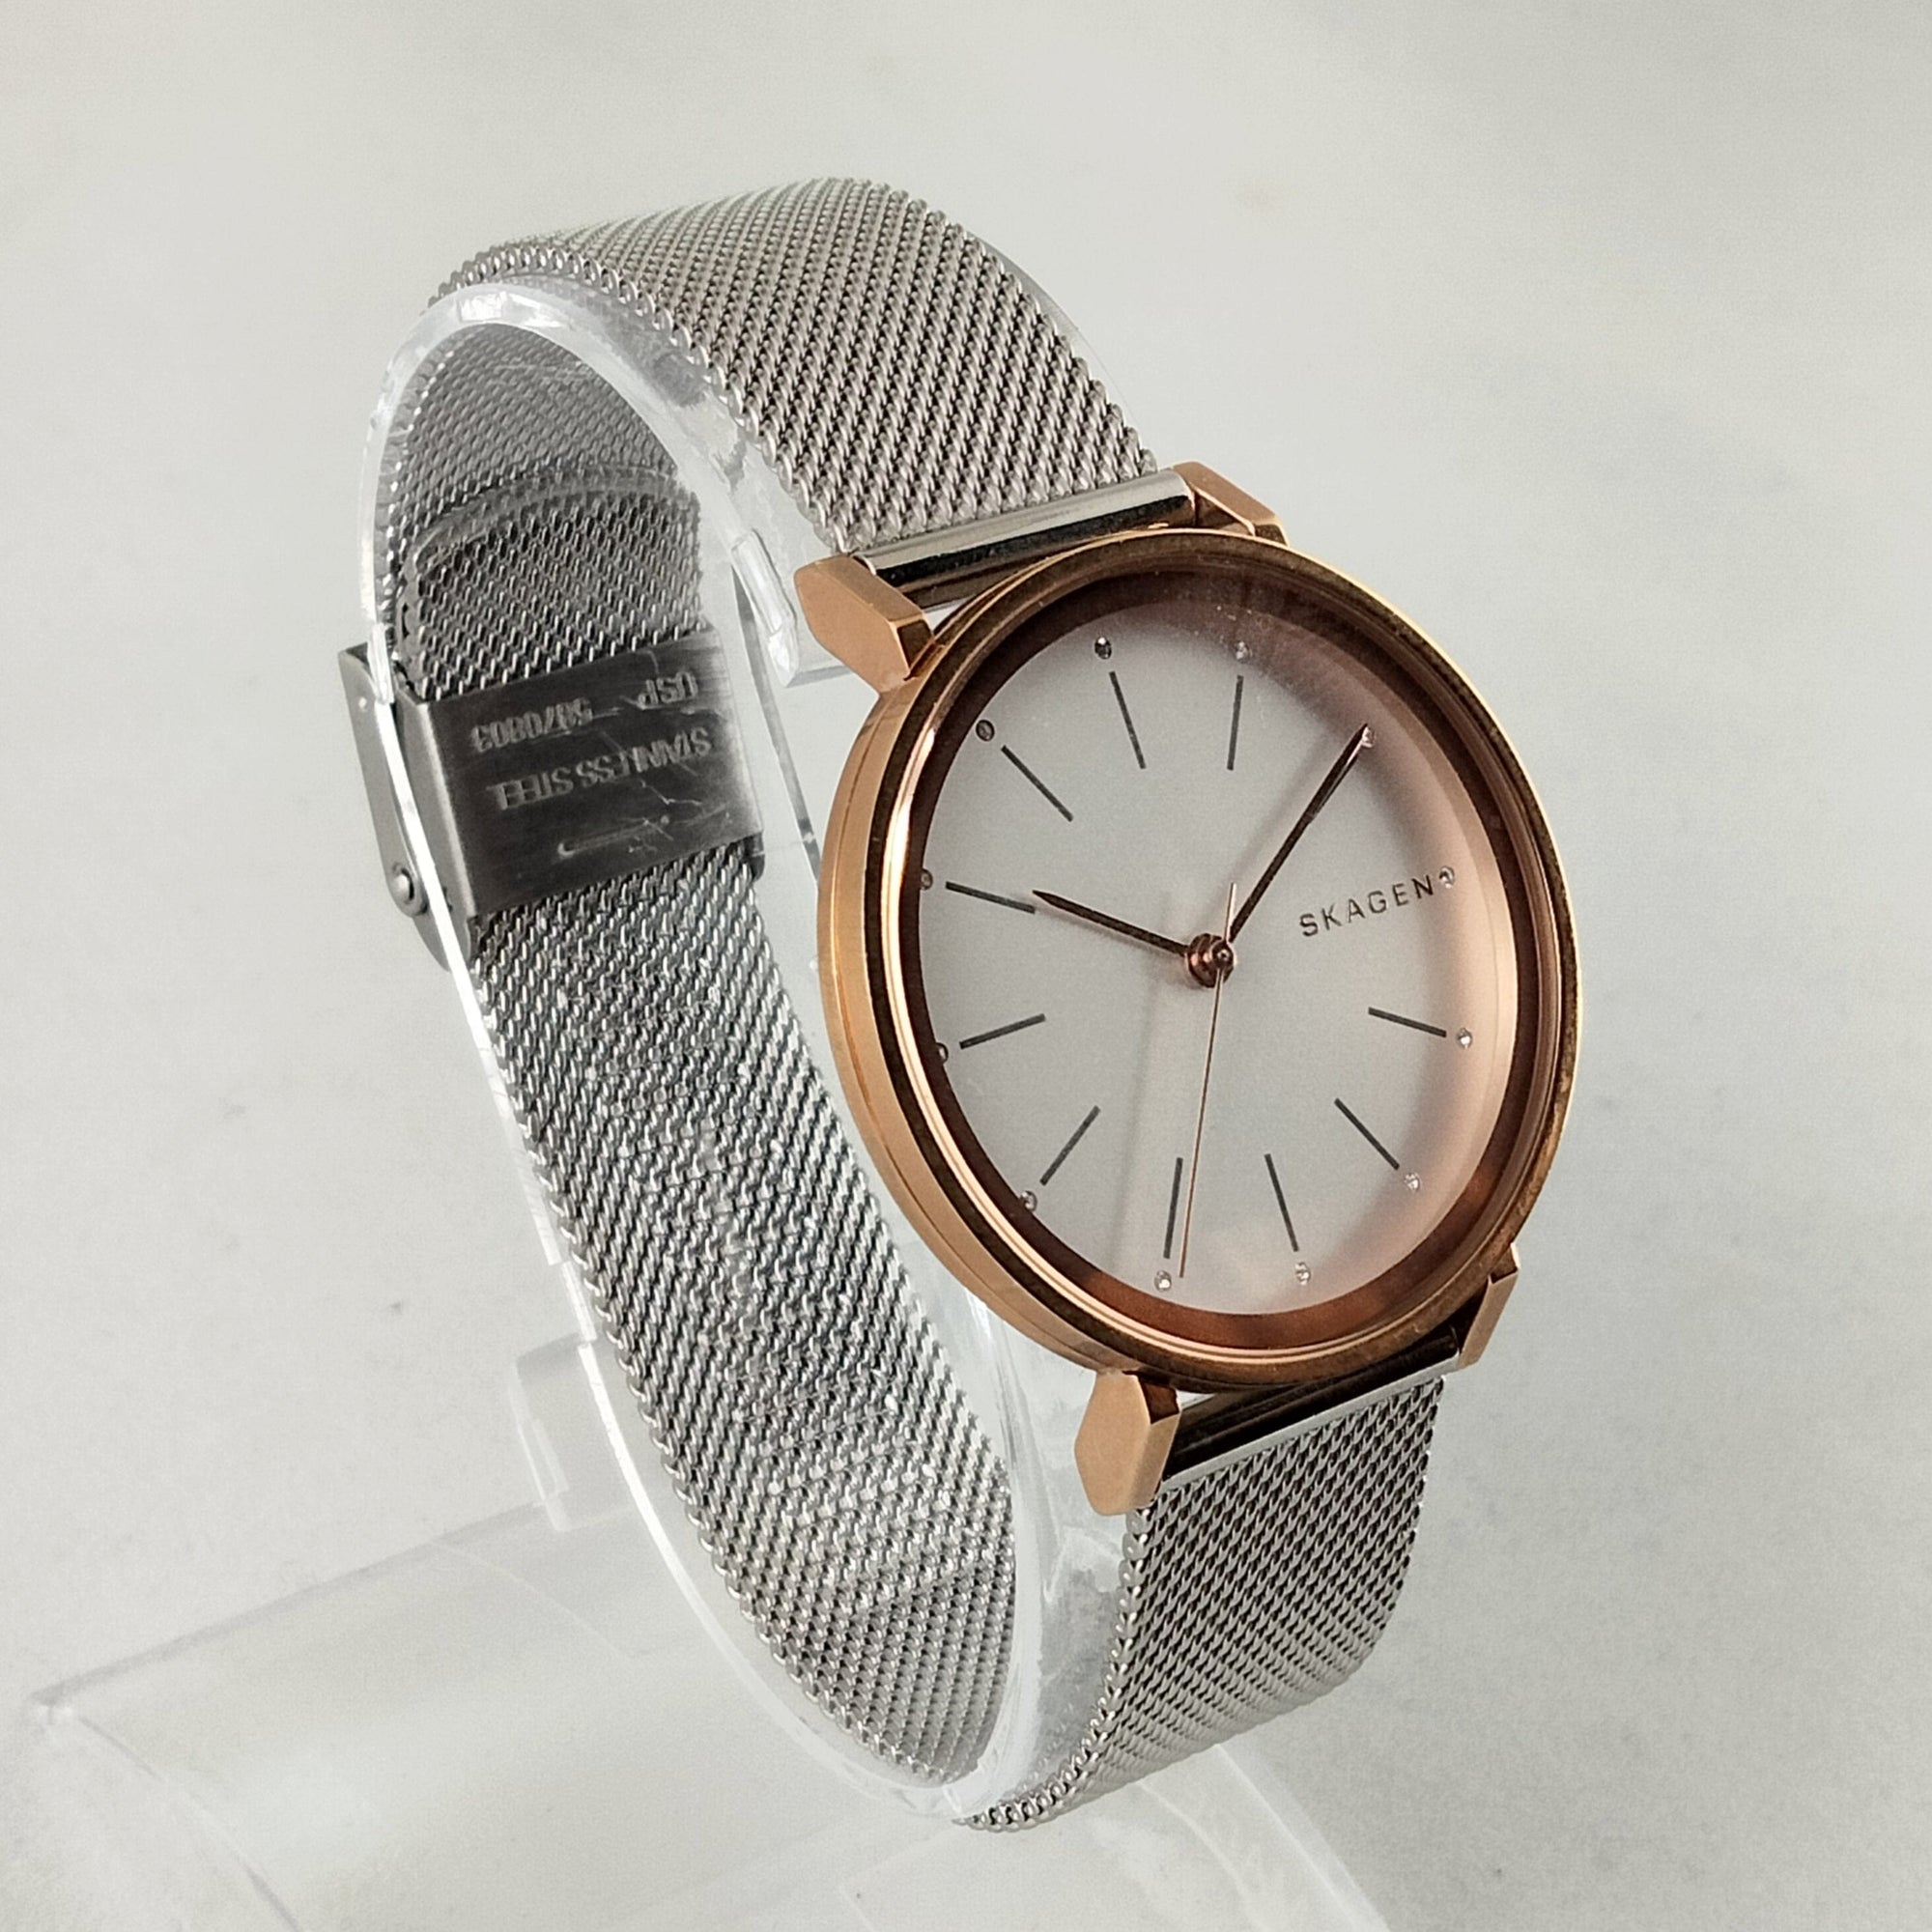 I Like Mikes Mid Century Modern Watches Skagen Women's Stainless Steel Watch, Cream Dial, Gold Tone and Jewel Details, Mesh Strap